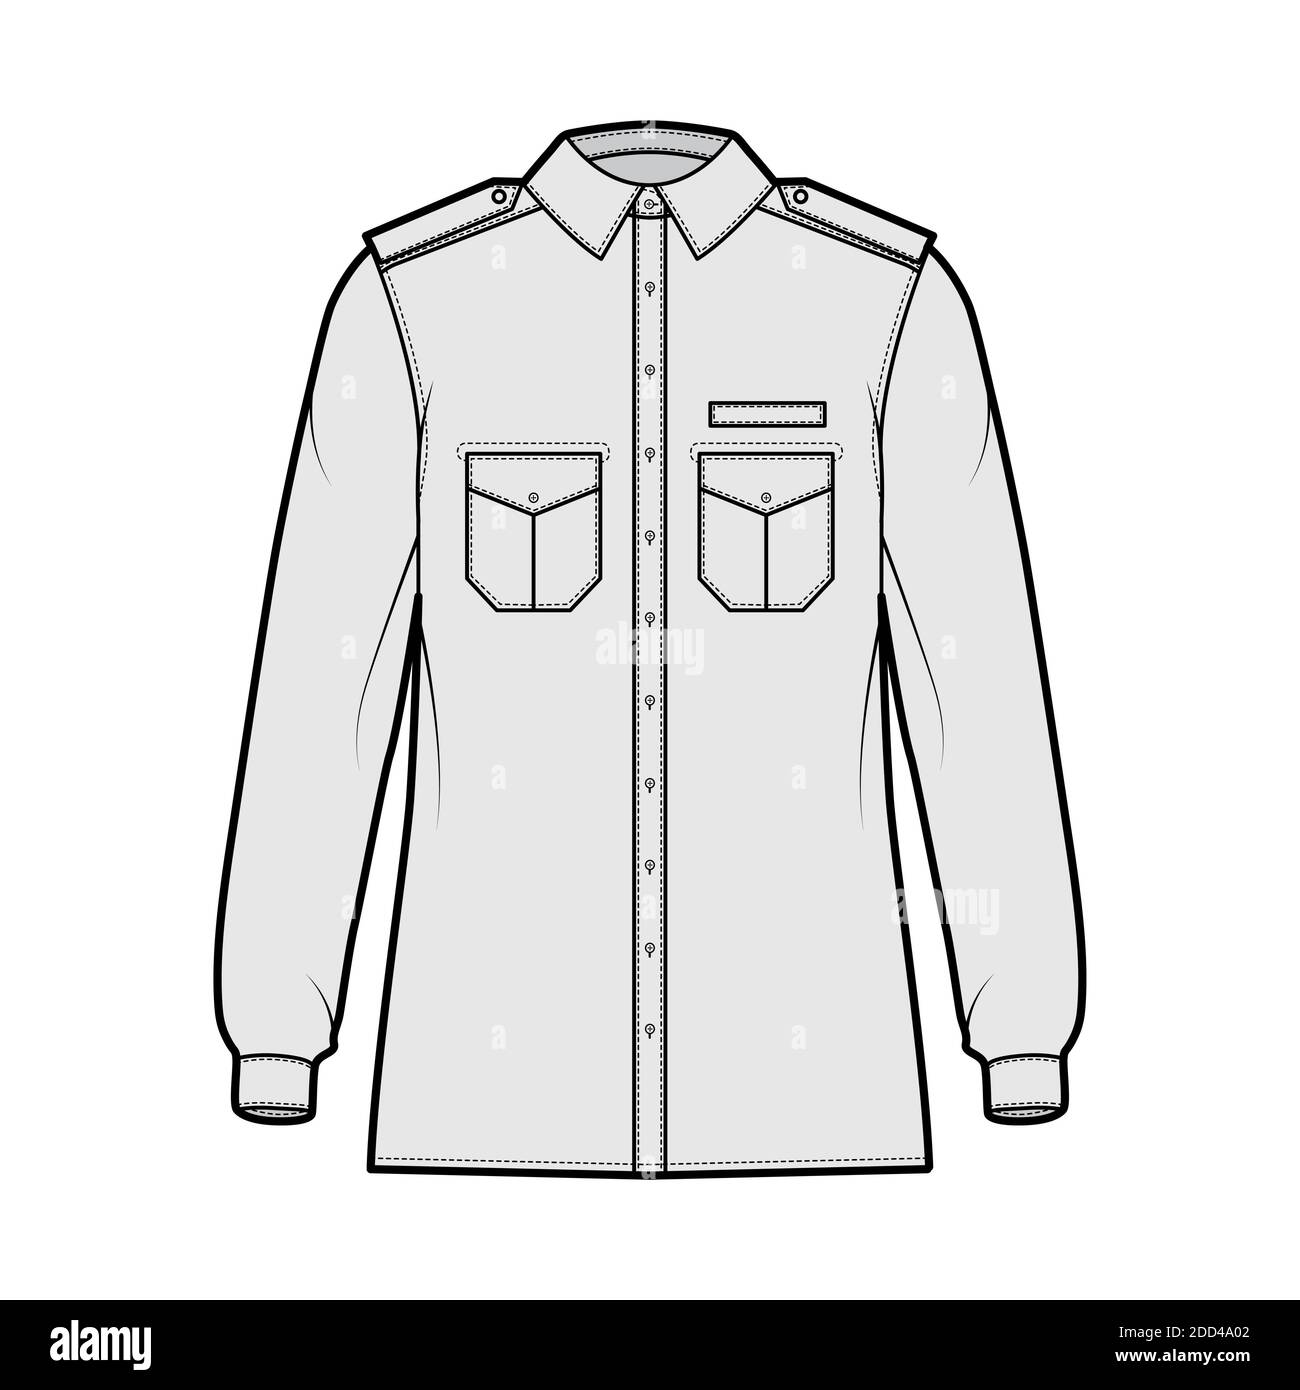 Shirt military technical fashion illustration with epaulette, flaps angled pockets, long sleeve, relax fit, button-down, classic collar. Flat template front, grey color. Women men unisex top CAD Stock Vector